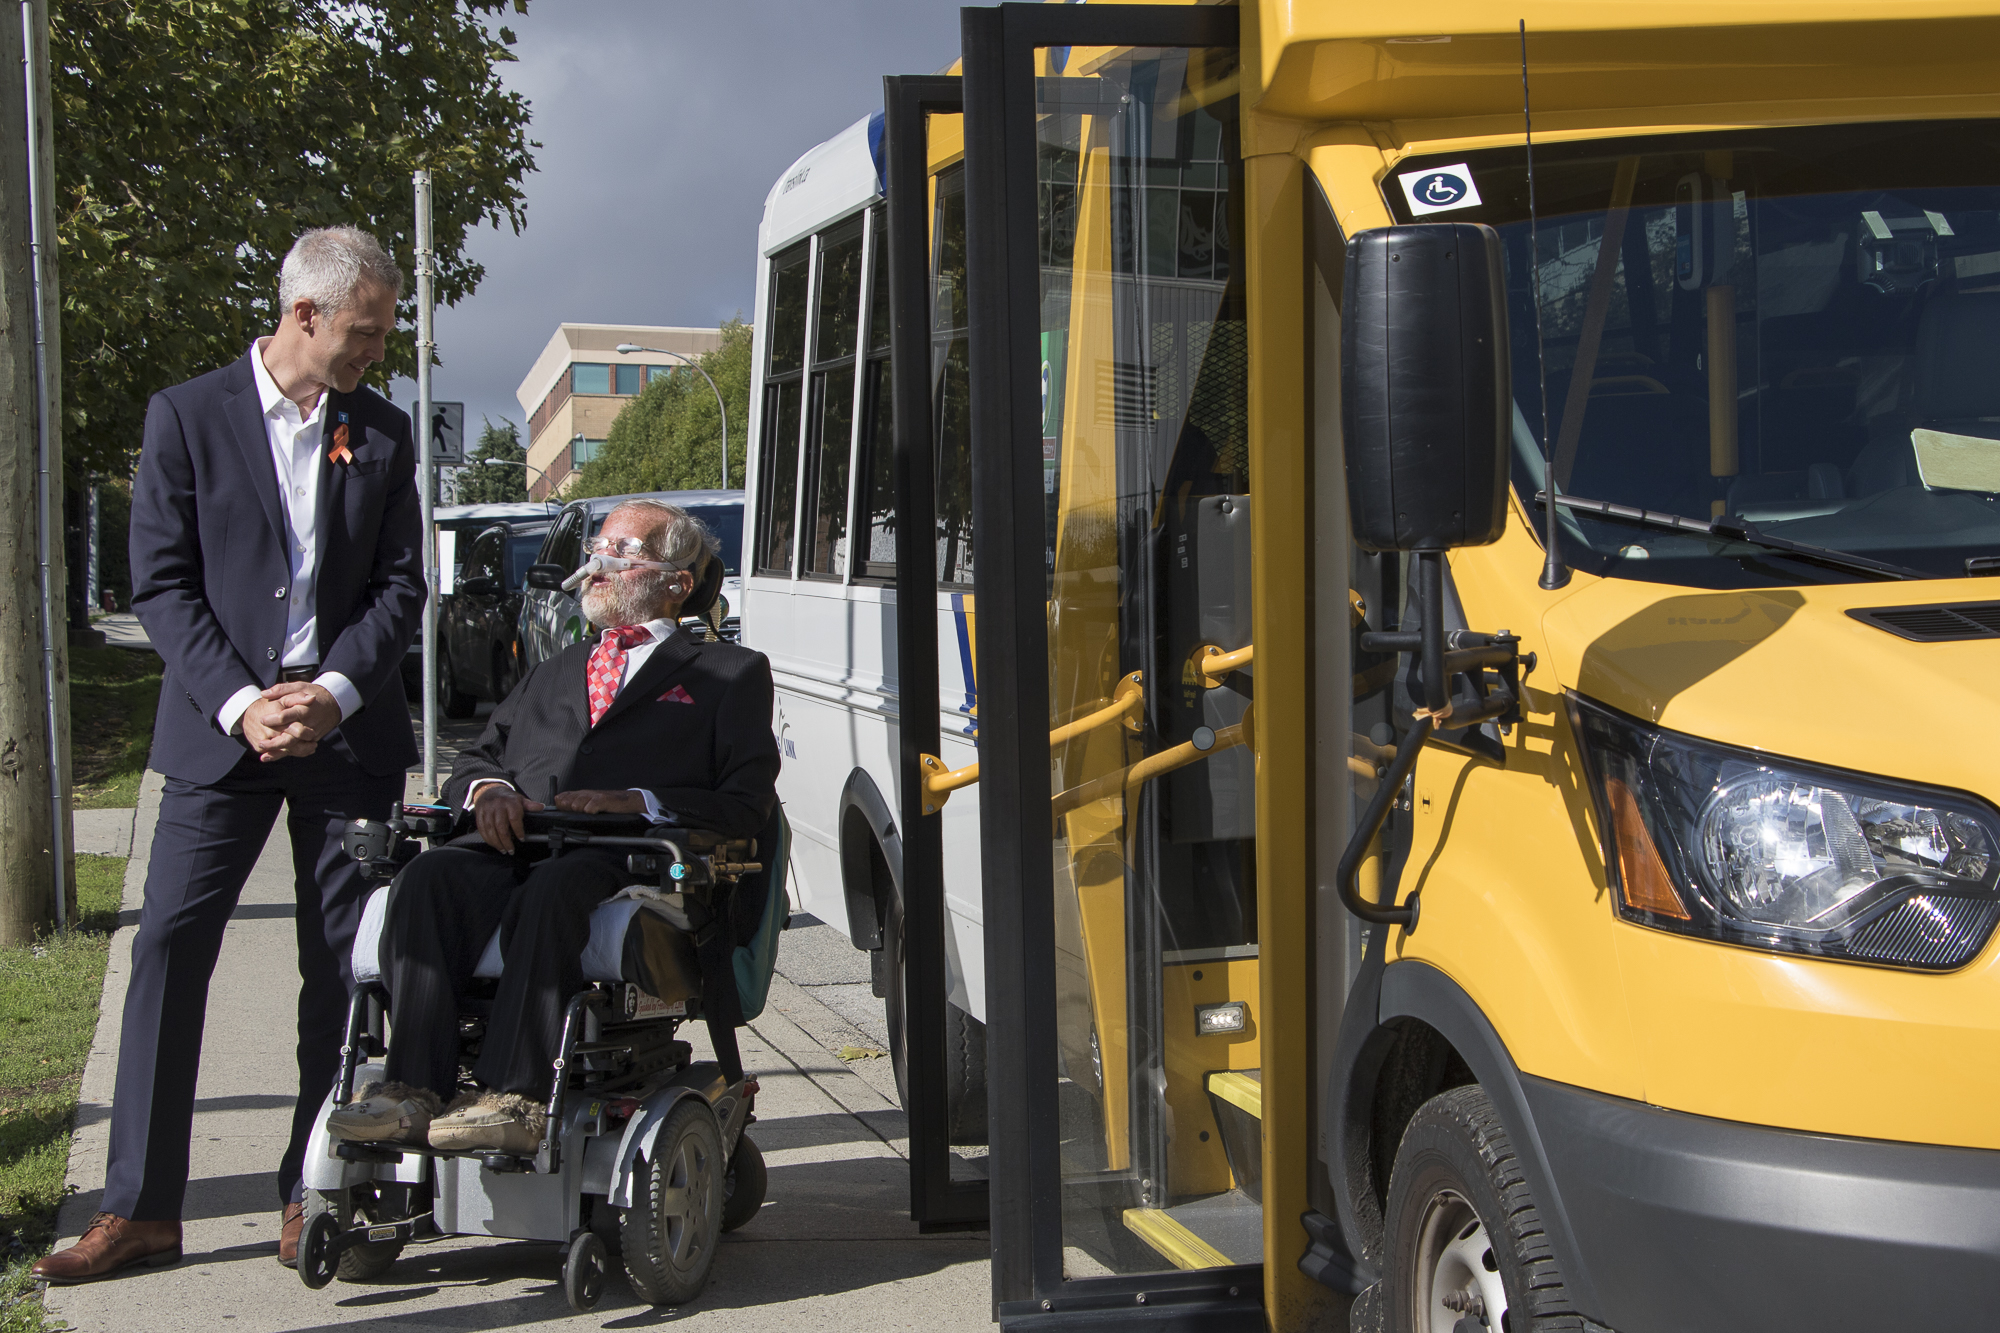 TransLink CEO Kevin Quinn and chair of TransLink HandyDART User Advisory Committee Tim Louis who is in a wheelchair are seen beside a HandyDART shuttle with its doors open 